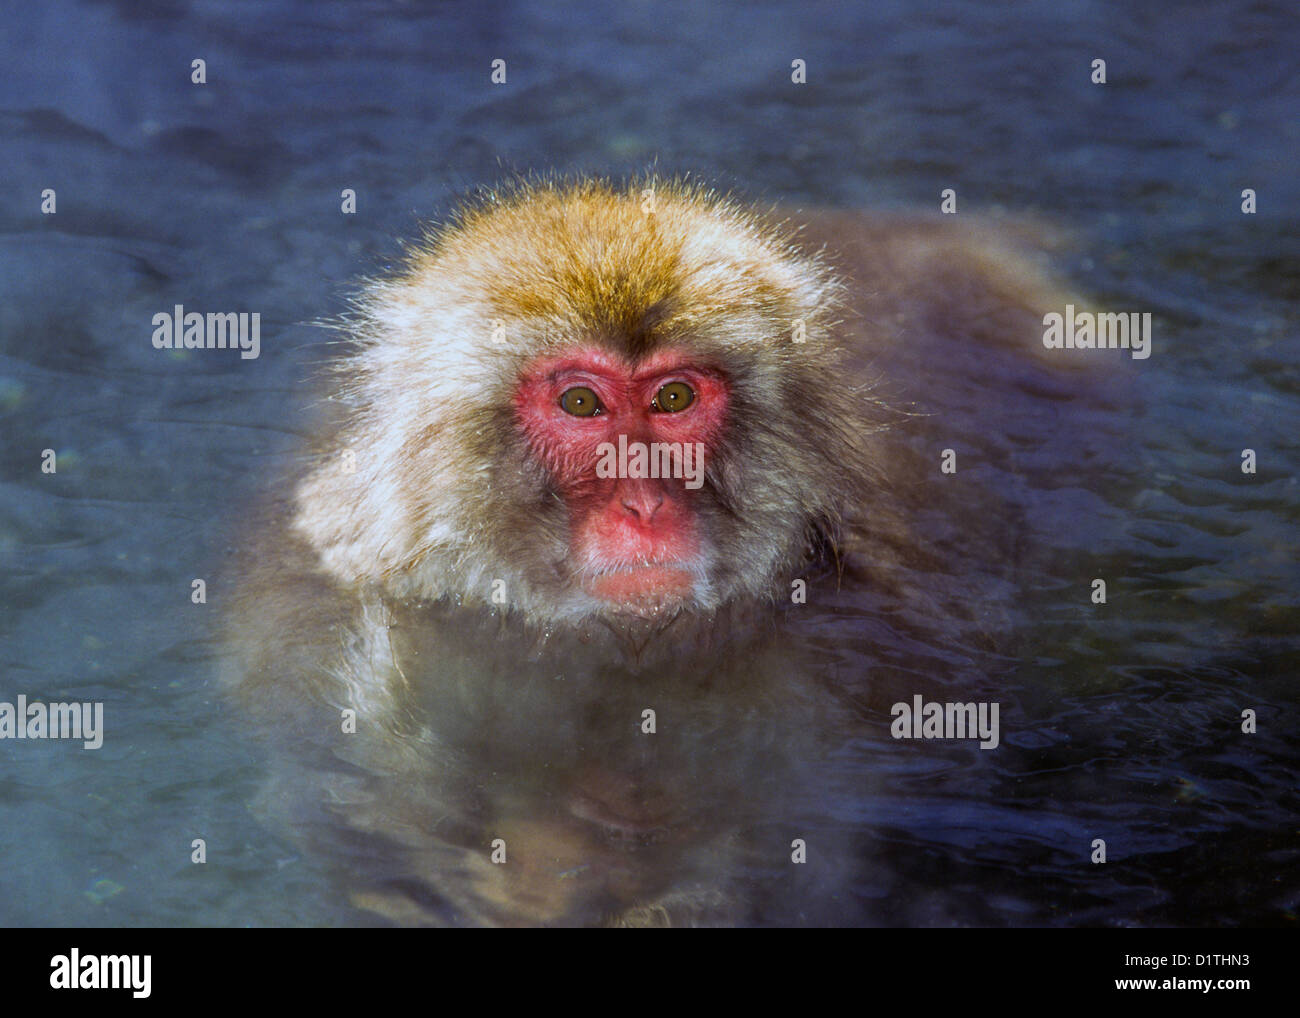 JAPANESE MACAQUE IN THE ALPS SWIMS IN A HOT THERMAL POOL IN WINTER Stock Photo